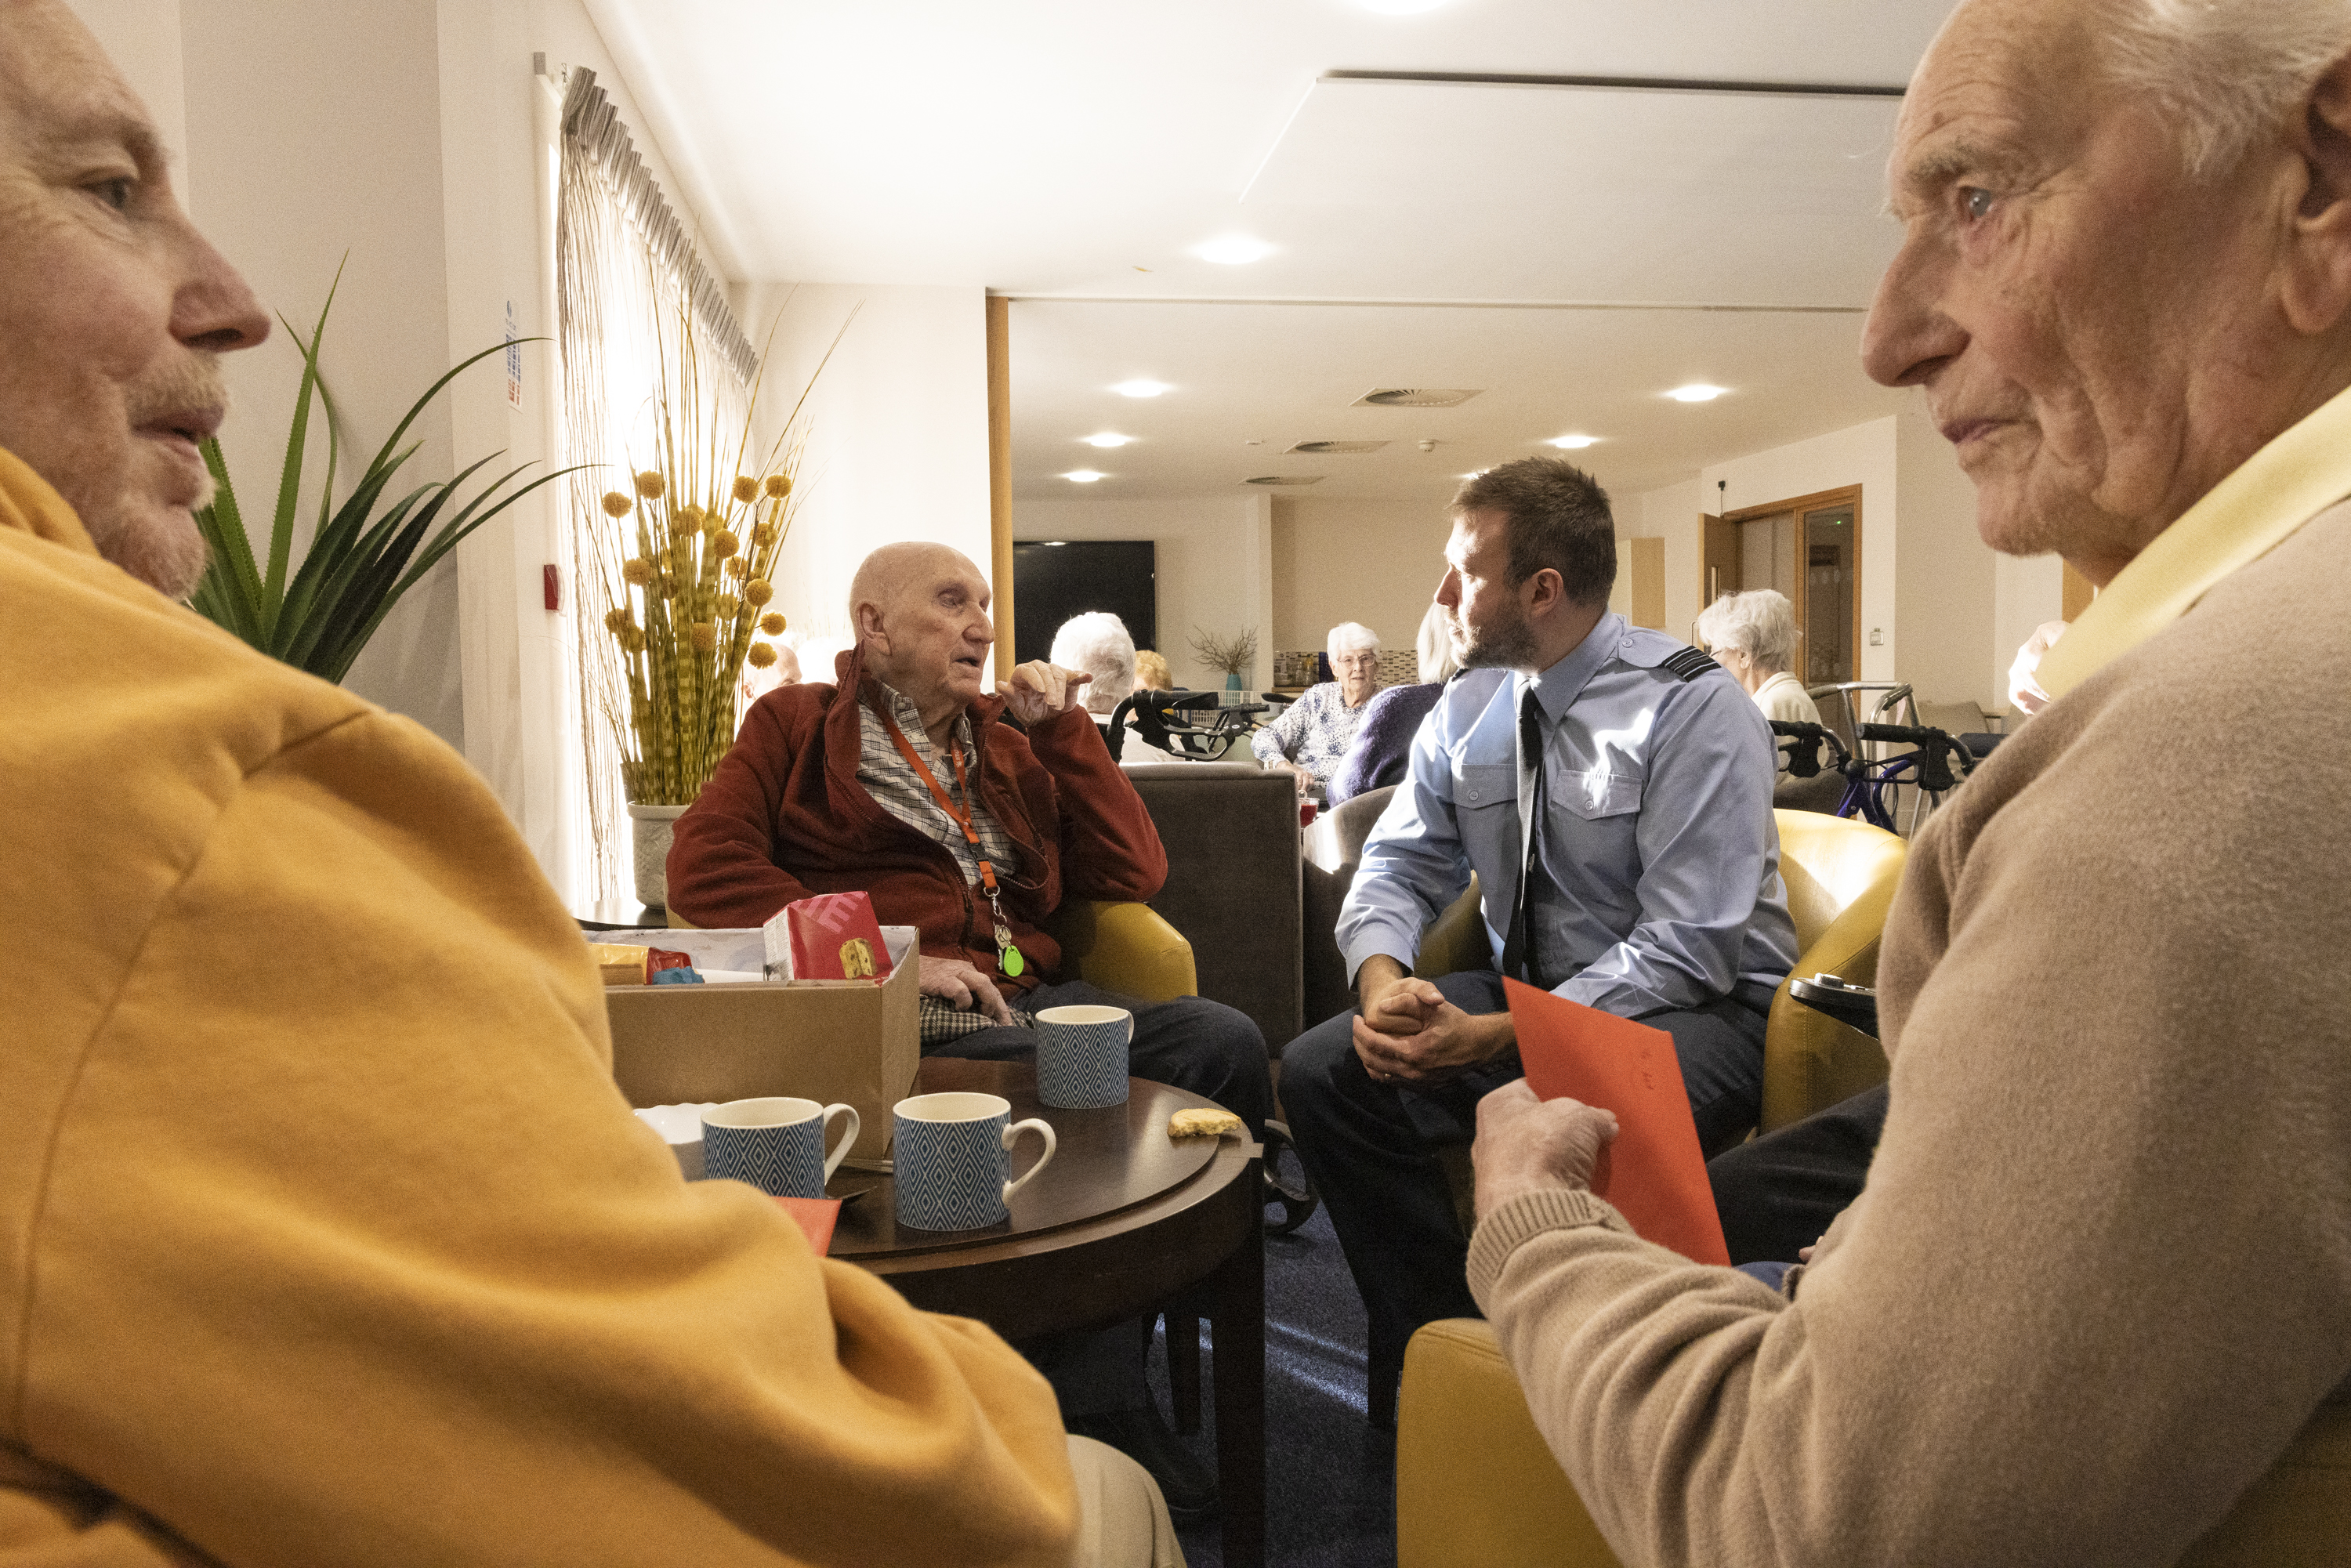 Personnel from RAF Wittering enjoyed a cup of tea and chat with residents of Kingfisher Court in Peterborough